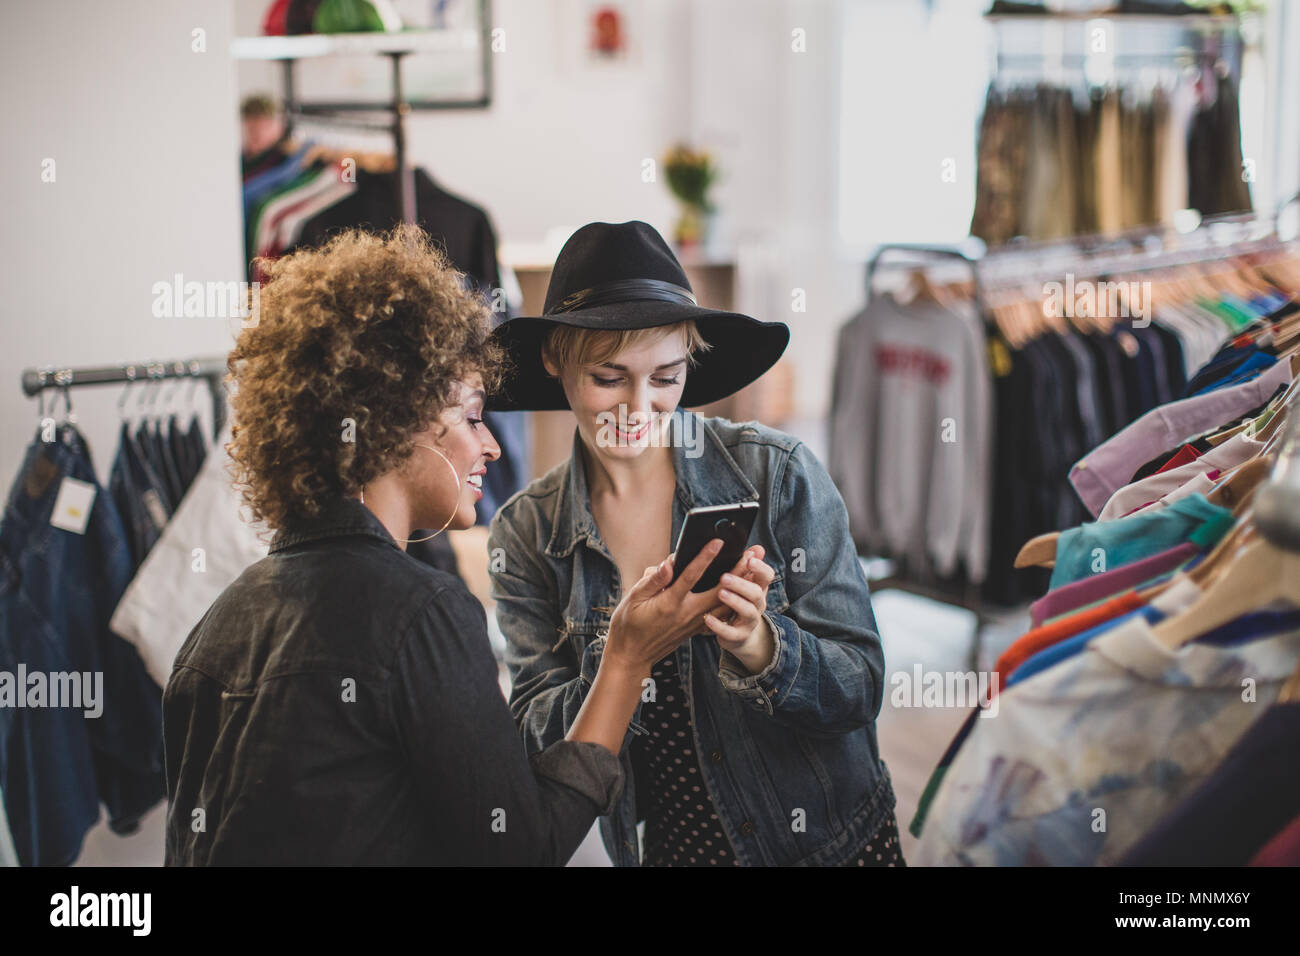 Millennial female friends looking at a smartphone in a vintage clothing store Stock Photo